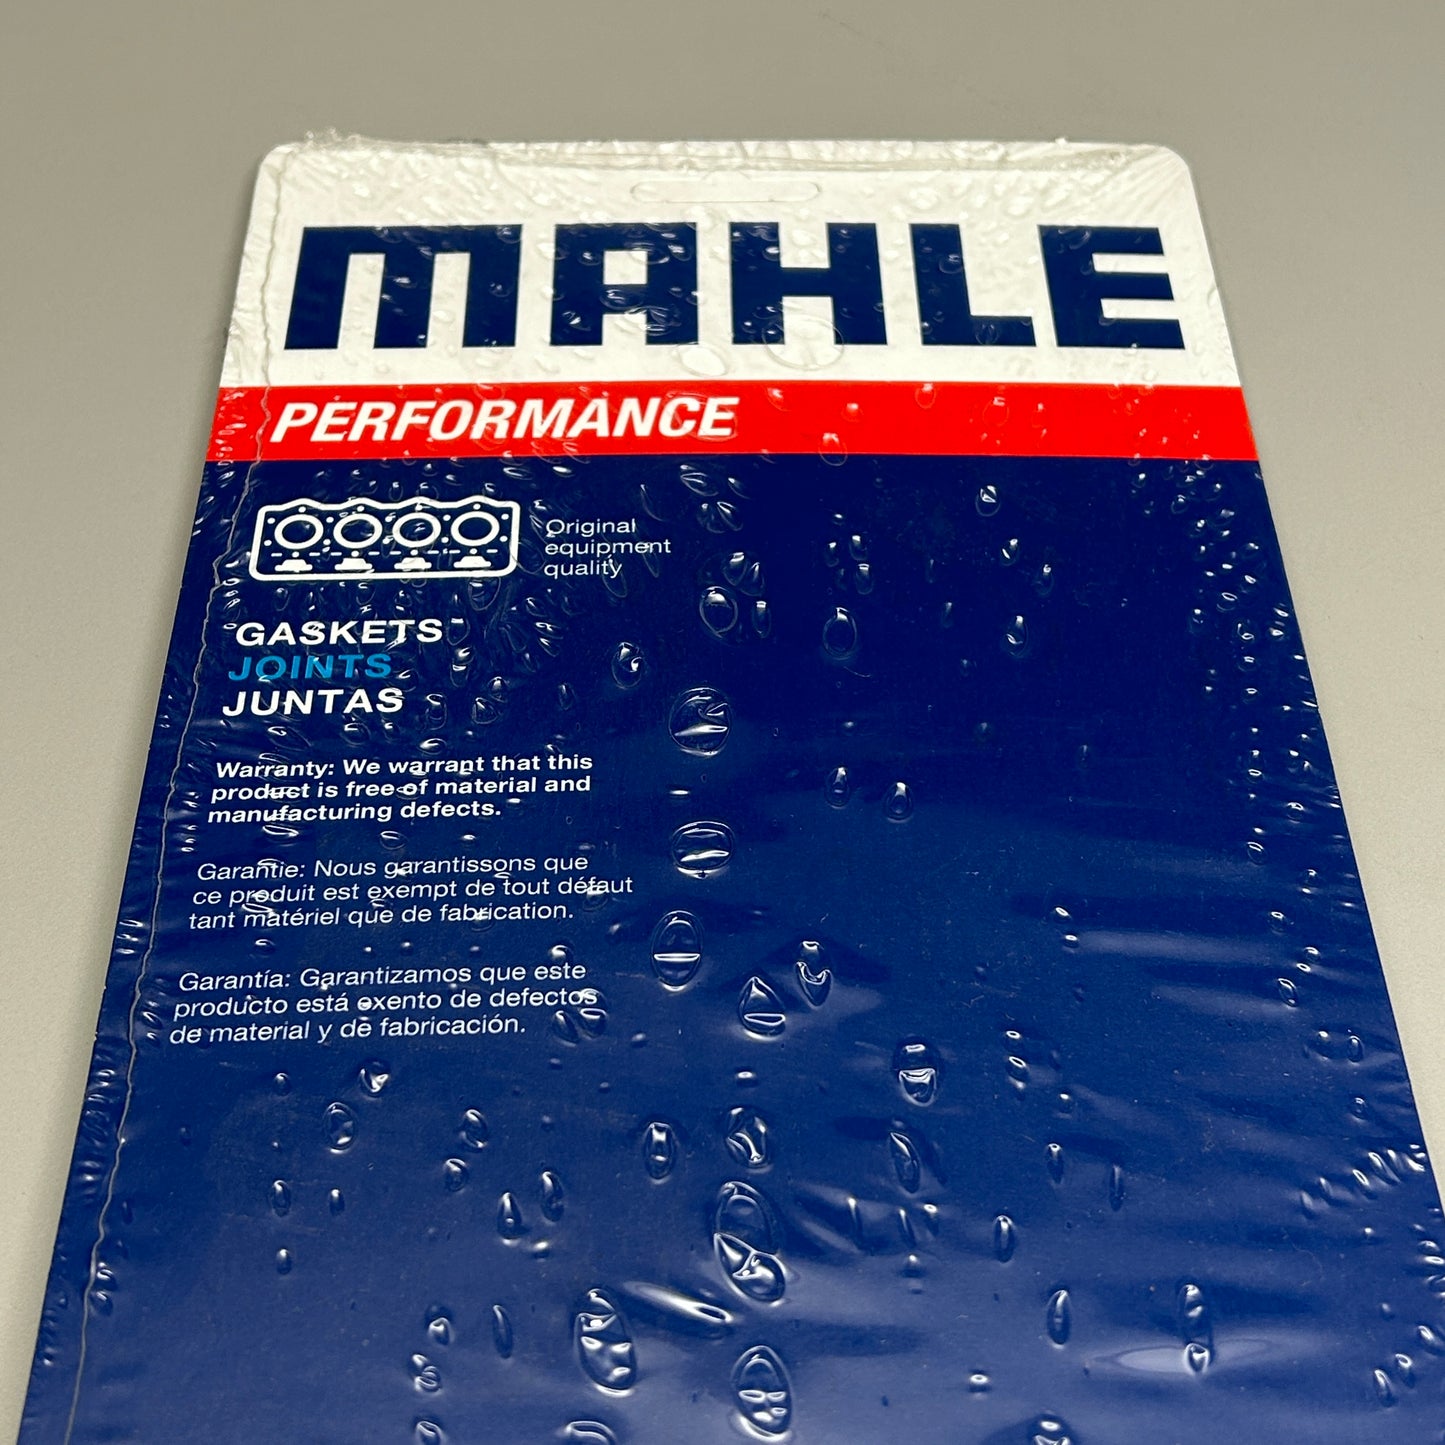 MAHLE Intake Manifold Gasket Set High Performance for Ford 95074SG (New)